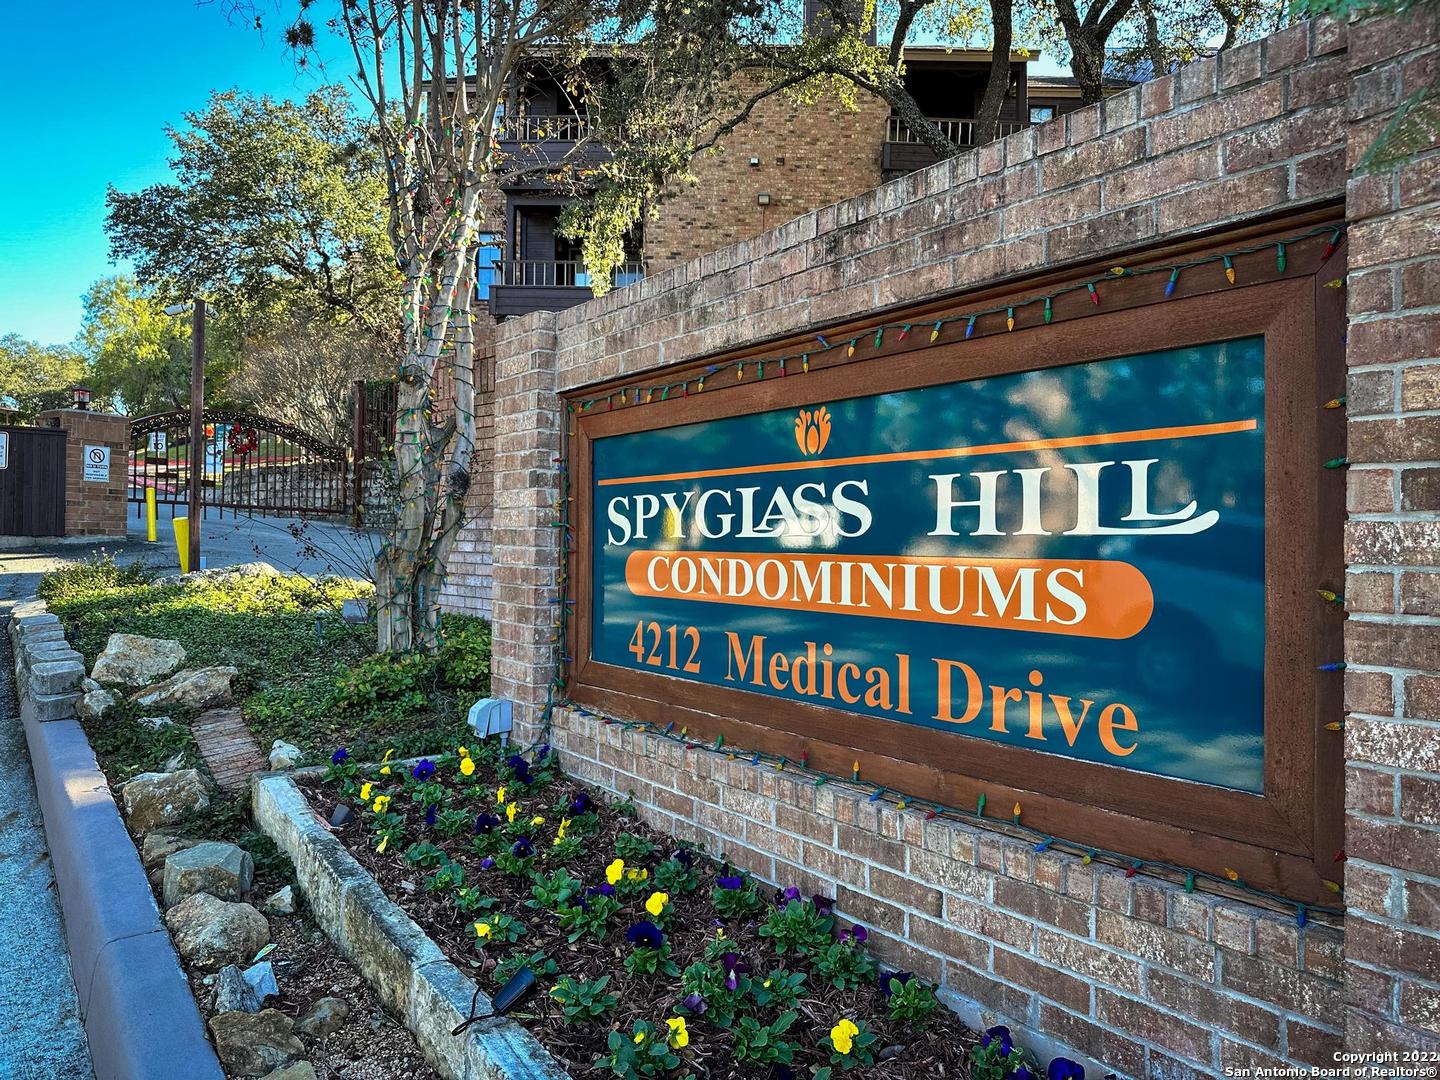 Welcome home to this spacious and beautifully updated condo in the popular, Spyglass Hill Condominiums. Located in the heart of the medical center and with over $30,000 in recent upgrades- this ground floor, end unit, condo is move in ready! At 860 square feet, the two bedroom and one bathroom floorplan provides ample space for living, cooking, and dining. In the kitchen you'll find all new Whirlpool appliances and new tile floor. The second bedroom could be used as an office or den, complete with a wetbar and sink. The bathroom has been updated with new tile floors, beautiful vanity, and walk in shower. In the primary bedroom there is ample storage with a roomy, walk in closet. The interior has been freshly painted and new, plush carpeting was installed. Other updates include all new ceiling fans, two inch blinds for privacy, and brand new drapes. And lucky for you, the interior and exterior HVAC system has been completely replaced! Outside you'll find a comfortable patio with a washer and dryer which will remain with the condo. Other perks of this beautiful condo include a quiet and gated community, two pools, and tennis courts. Come see Unit 1301 today!